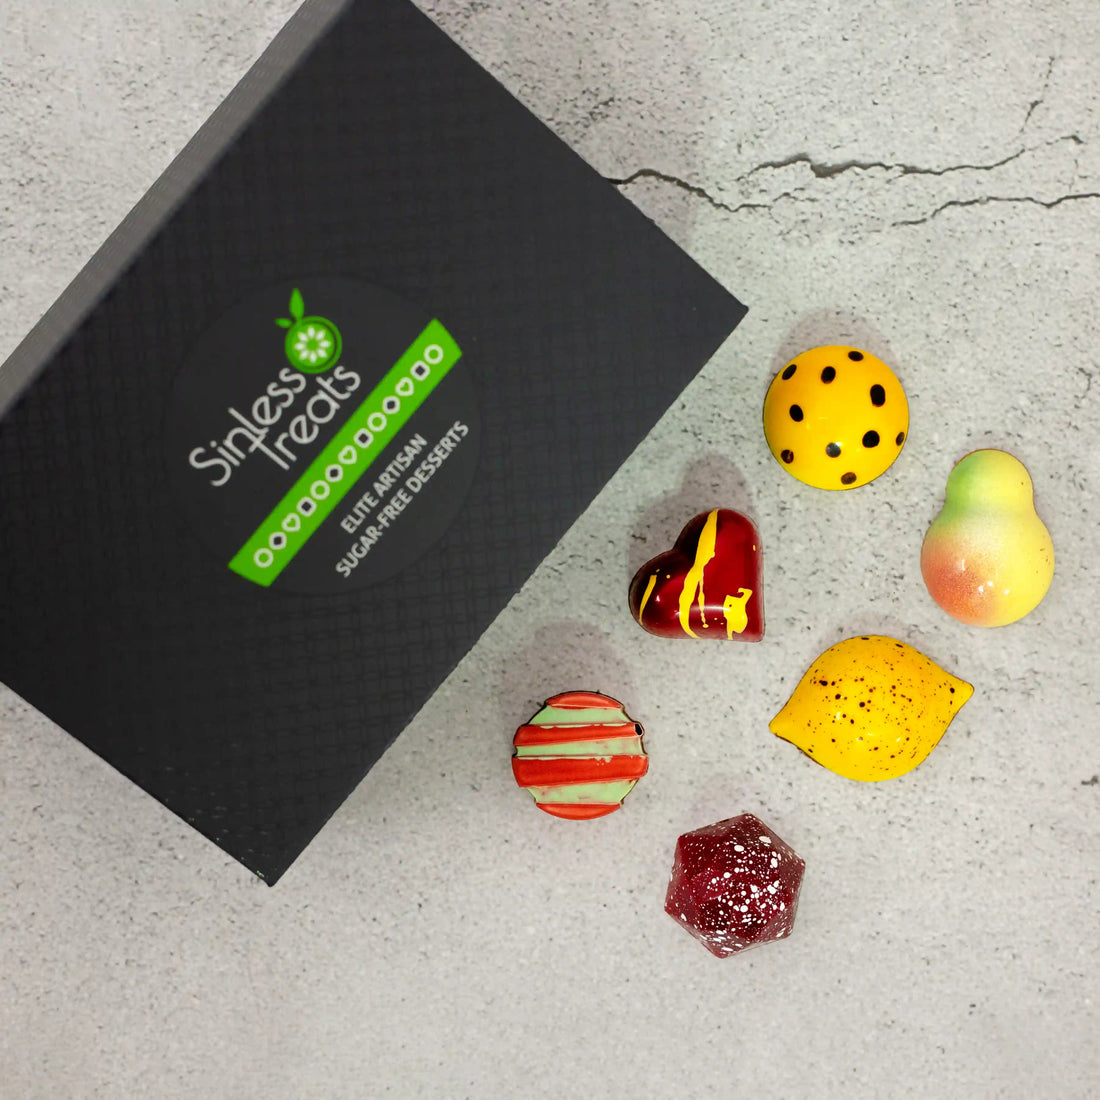 Vida Luxury chocolate gift box with 6 pieces of brightly painted fruity flavored chocolates